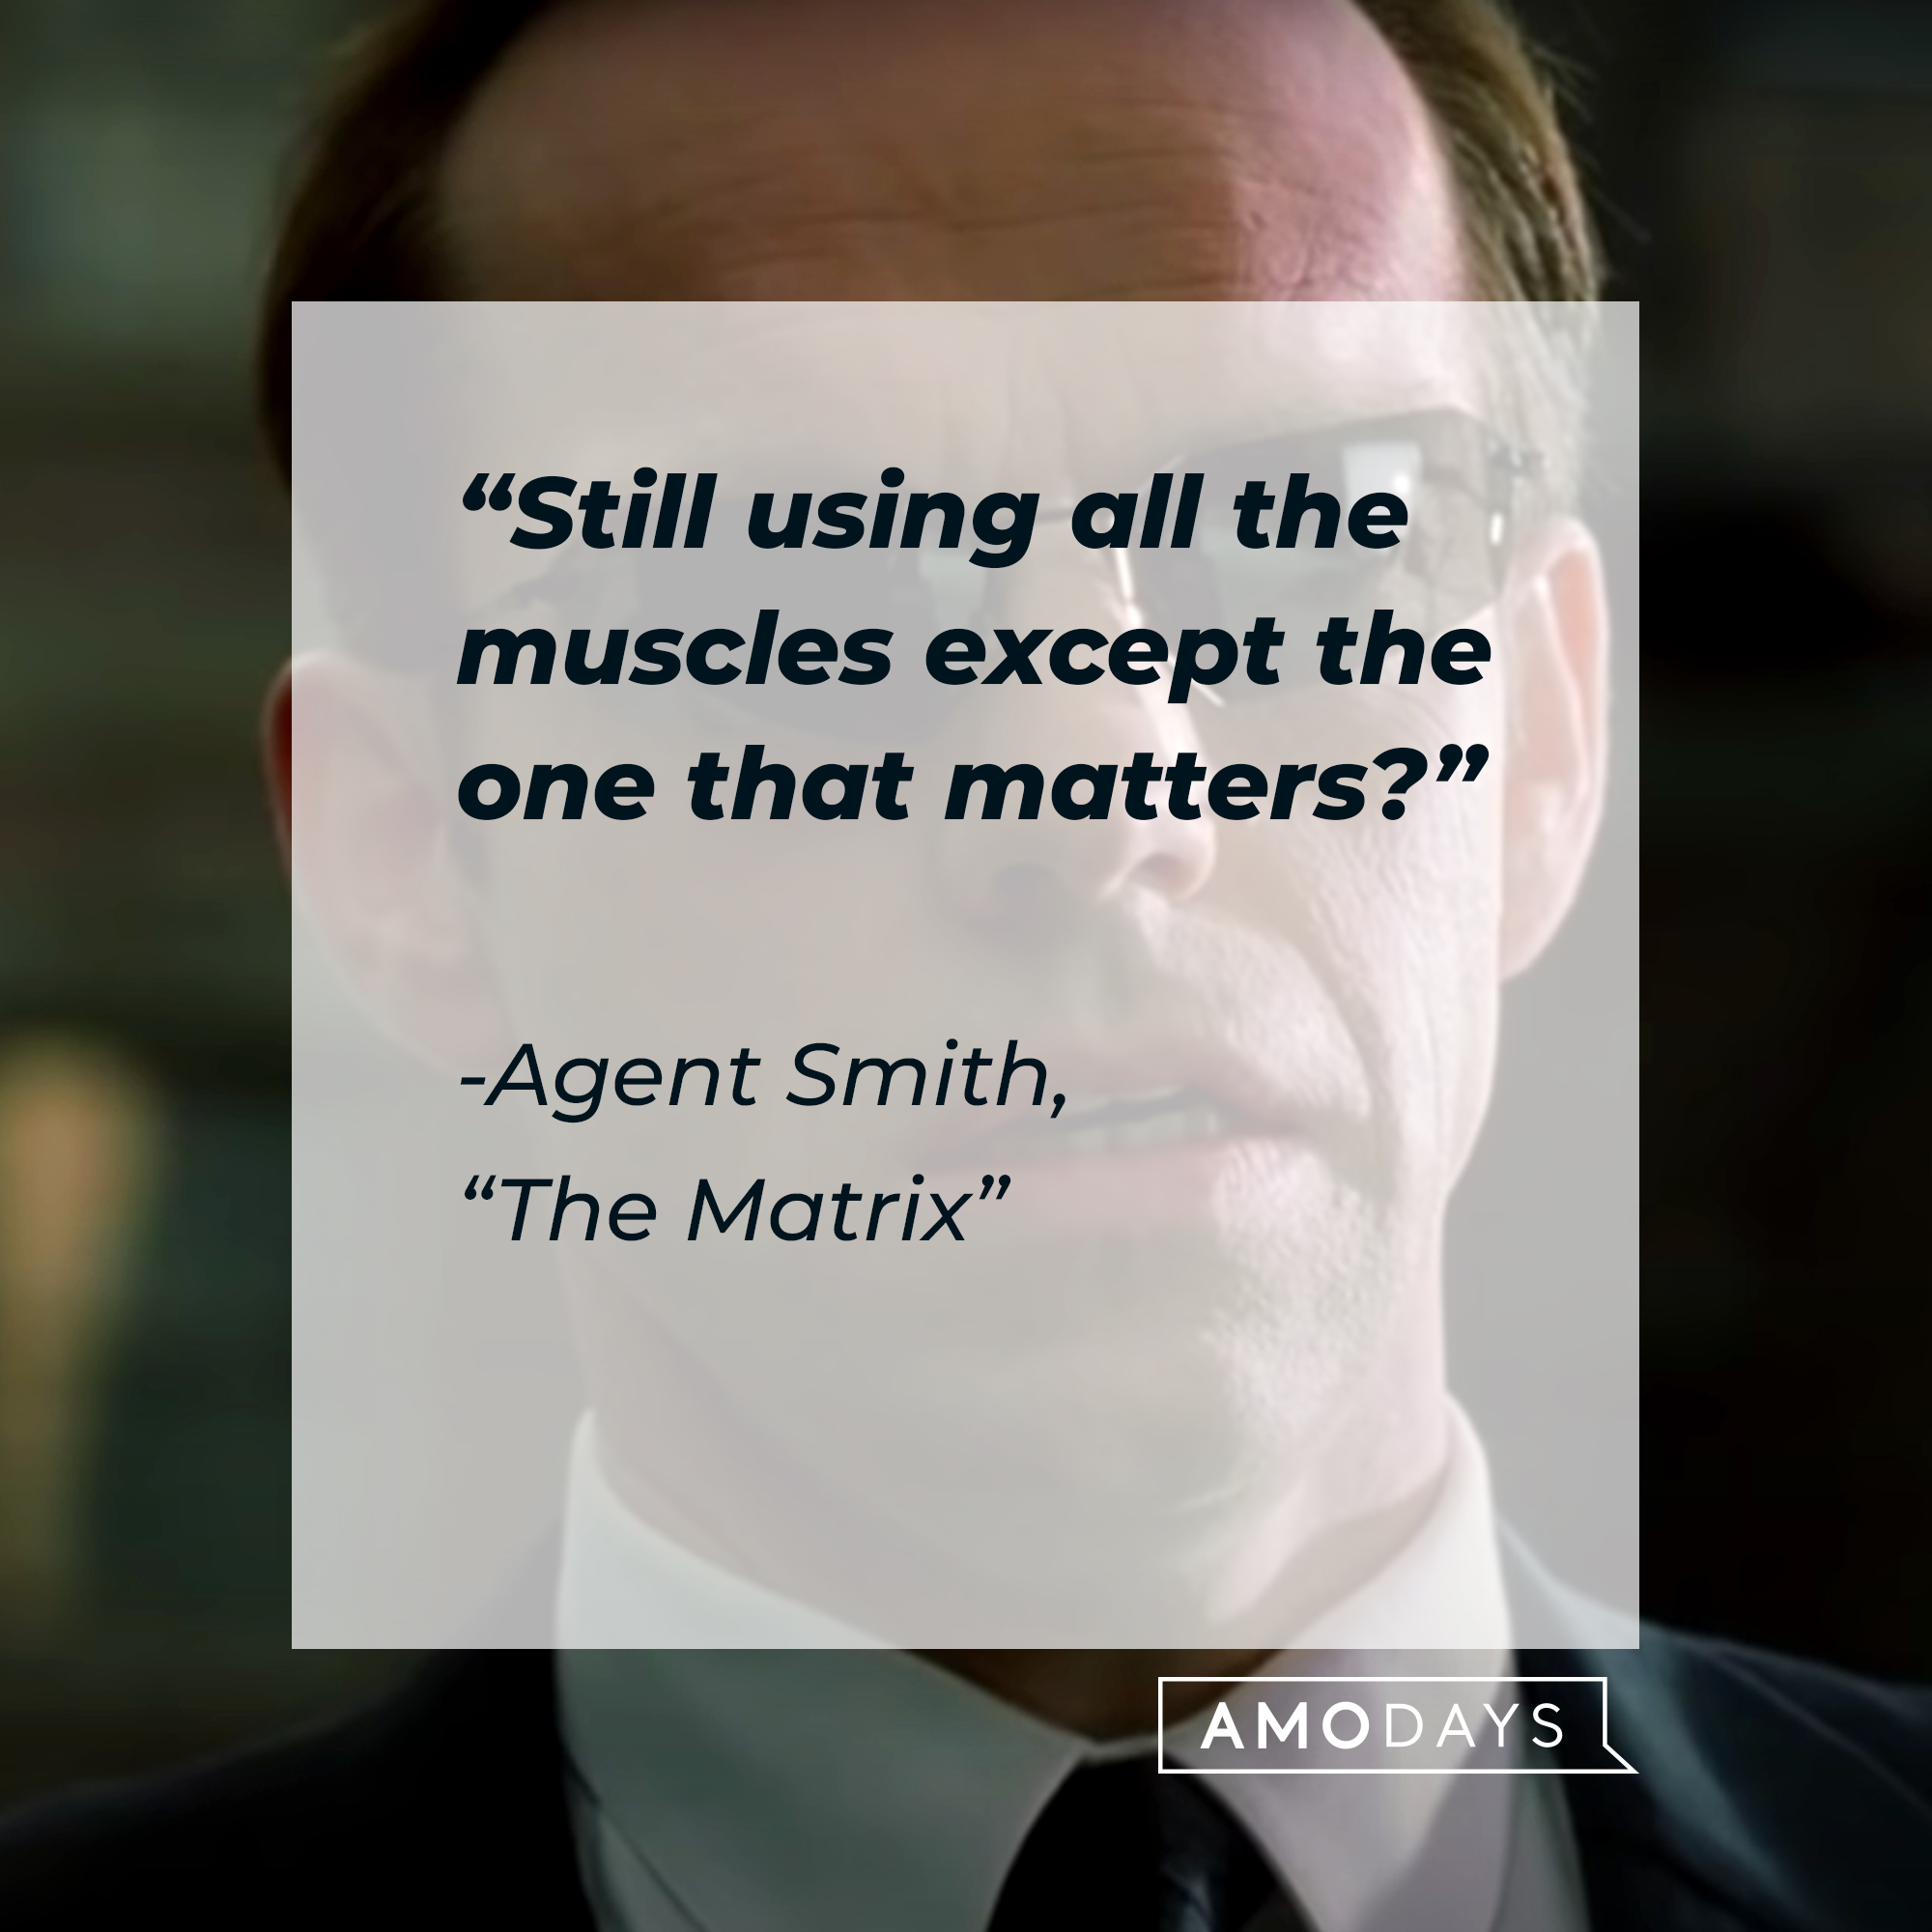 Agent Smith with his quote: "Still using all the muscles except the one that matters?" | Source: Facebook.com/TheMatrixMovie